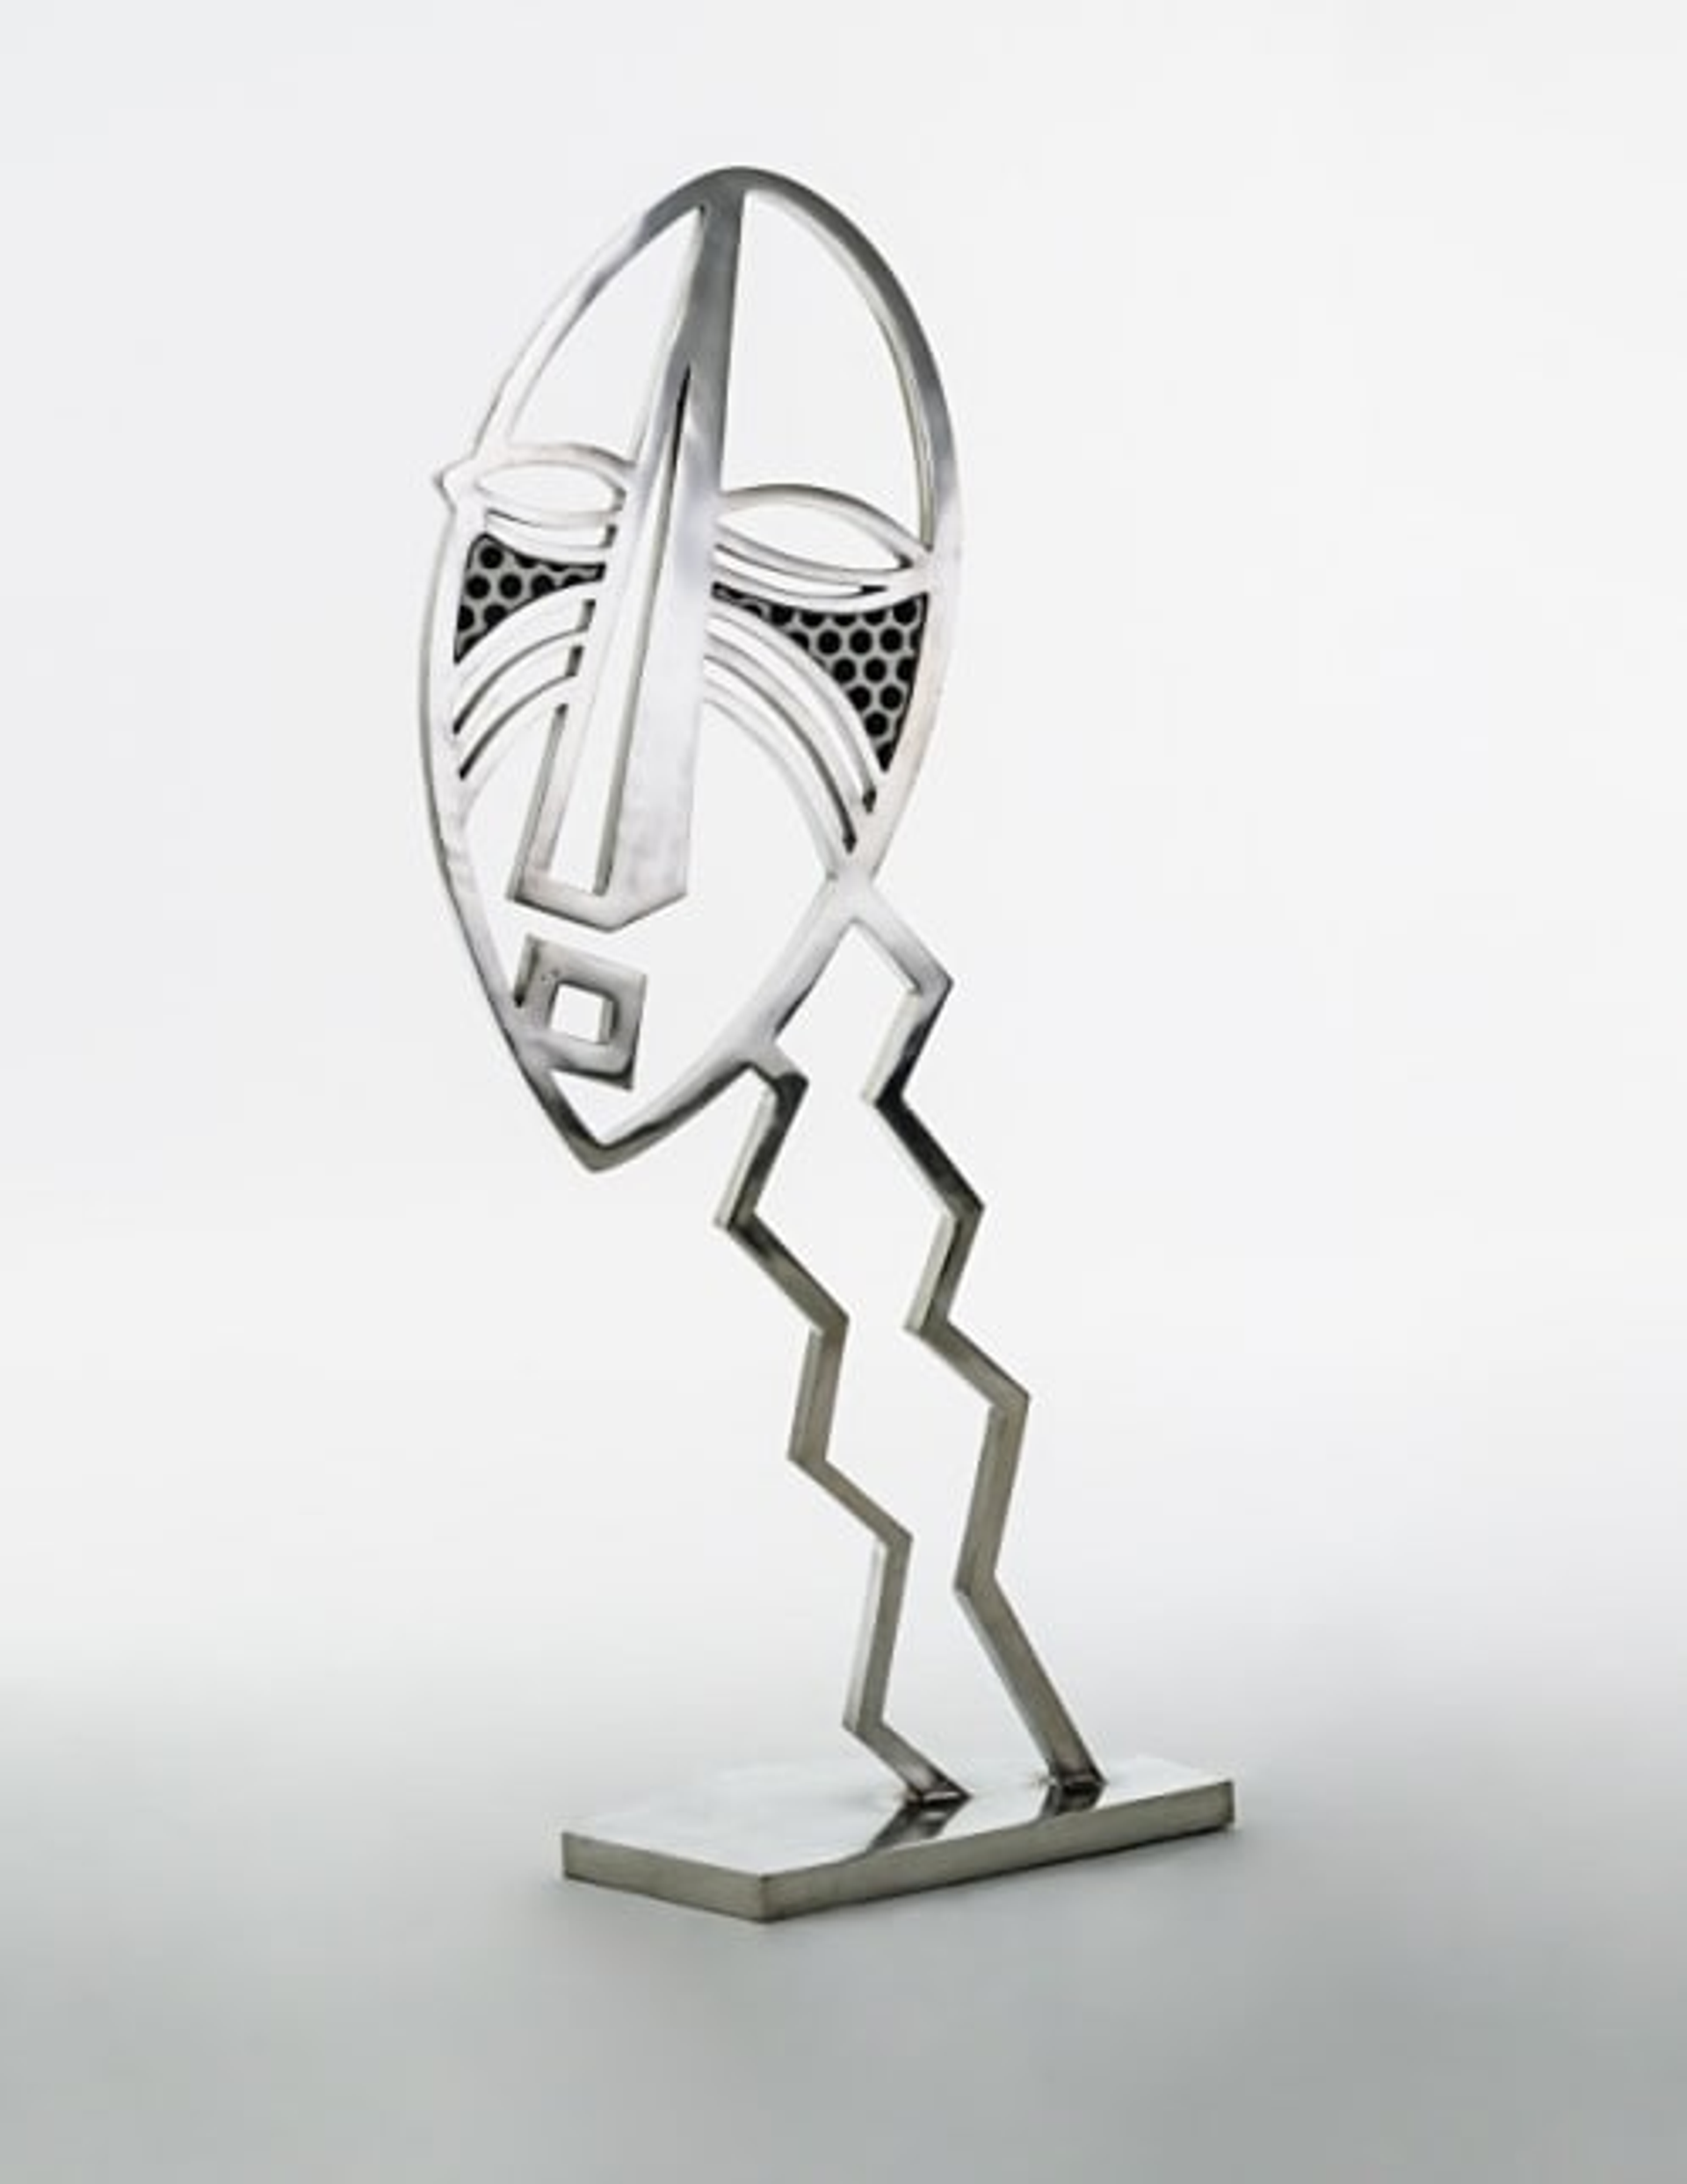 A large, metal sculpture of an African mask by Roy Lichtenstein.